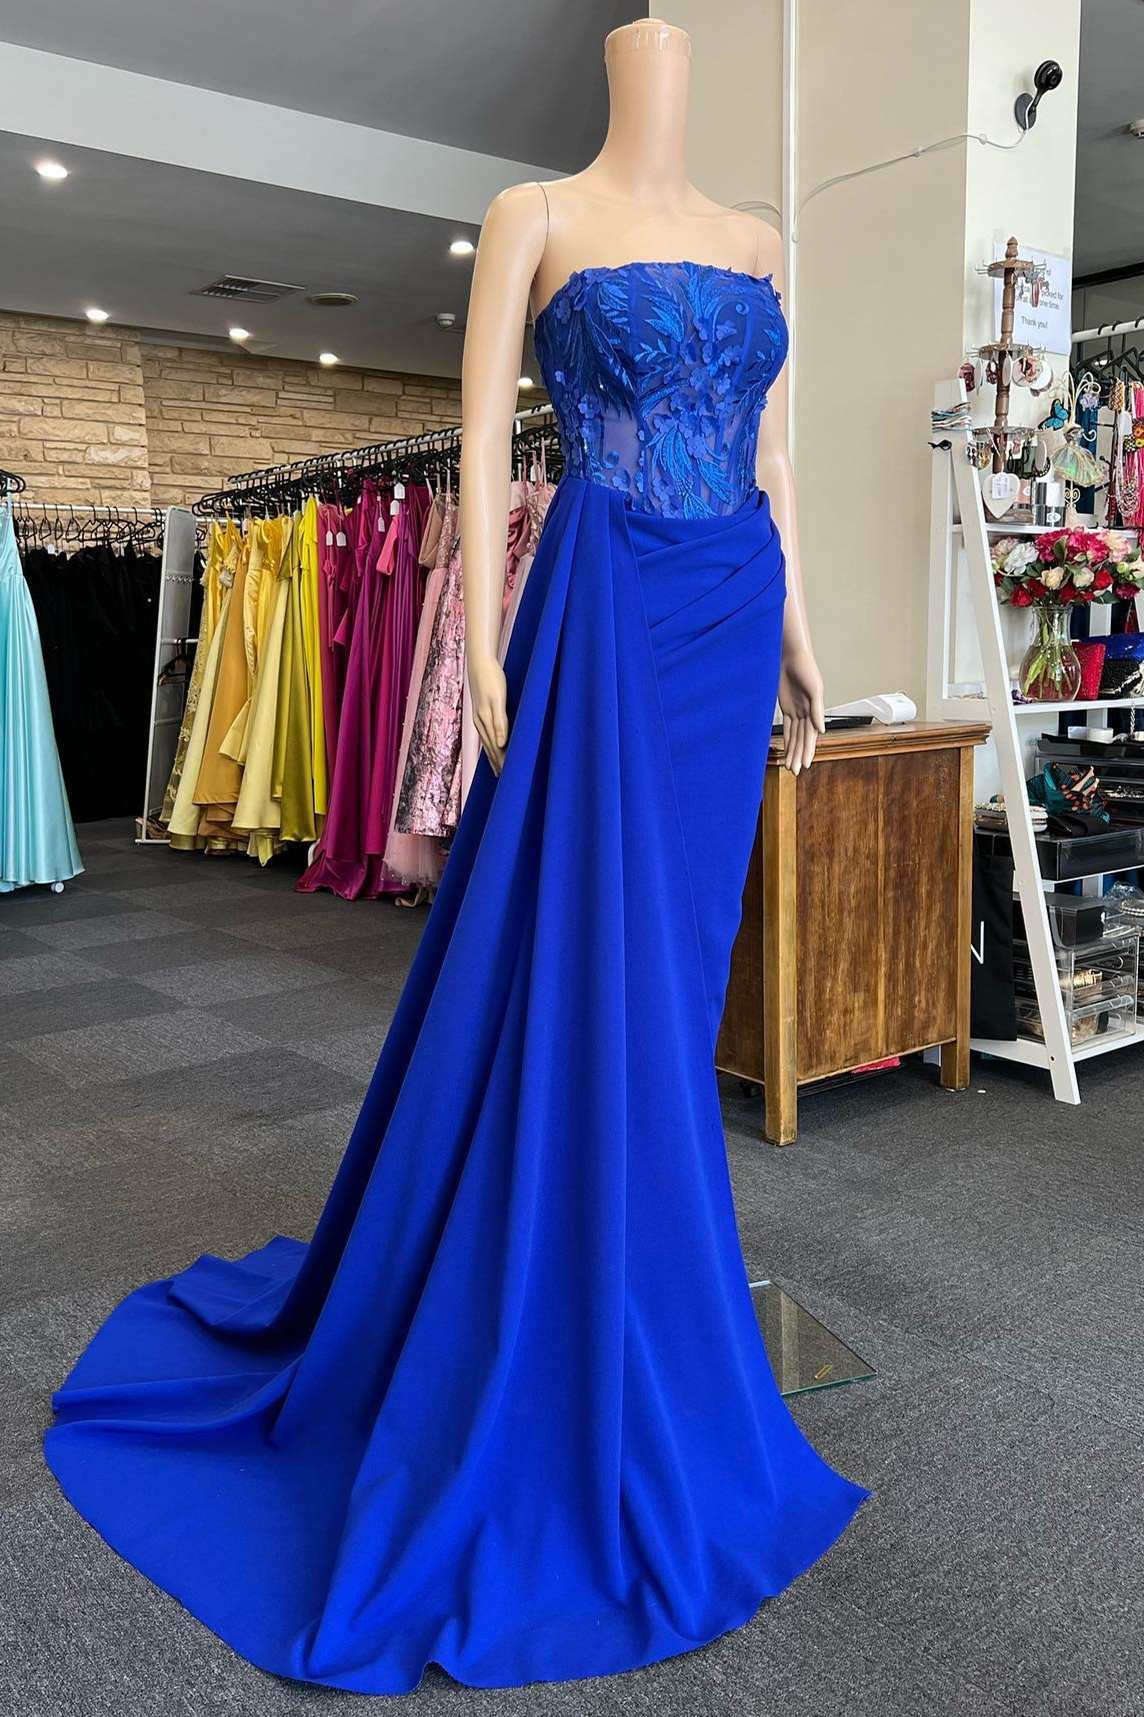 Party Dress Store, Royal Blue Appliques Strapless Long Formal Gown with Attached Train